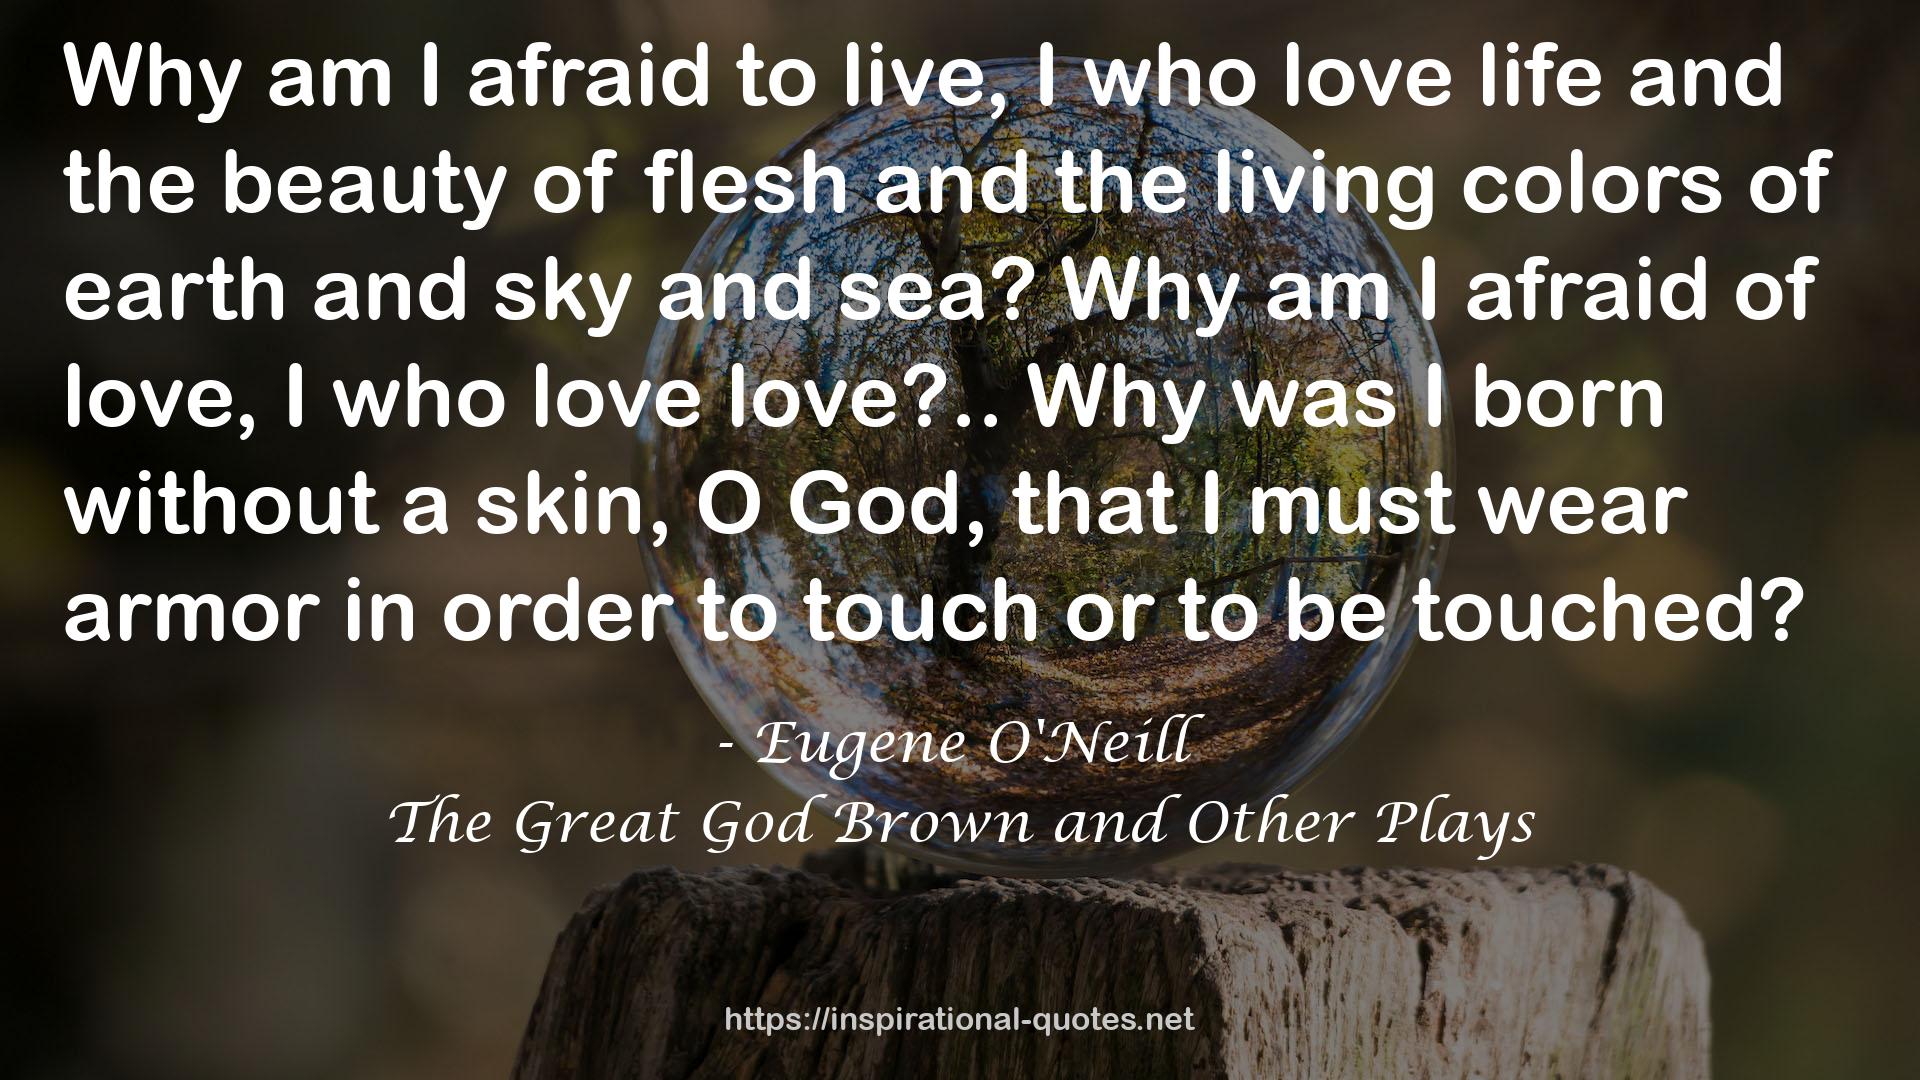 The Great God Brown and Other Plays QUOTES